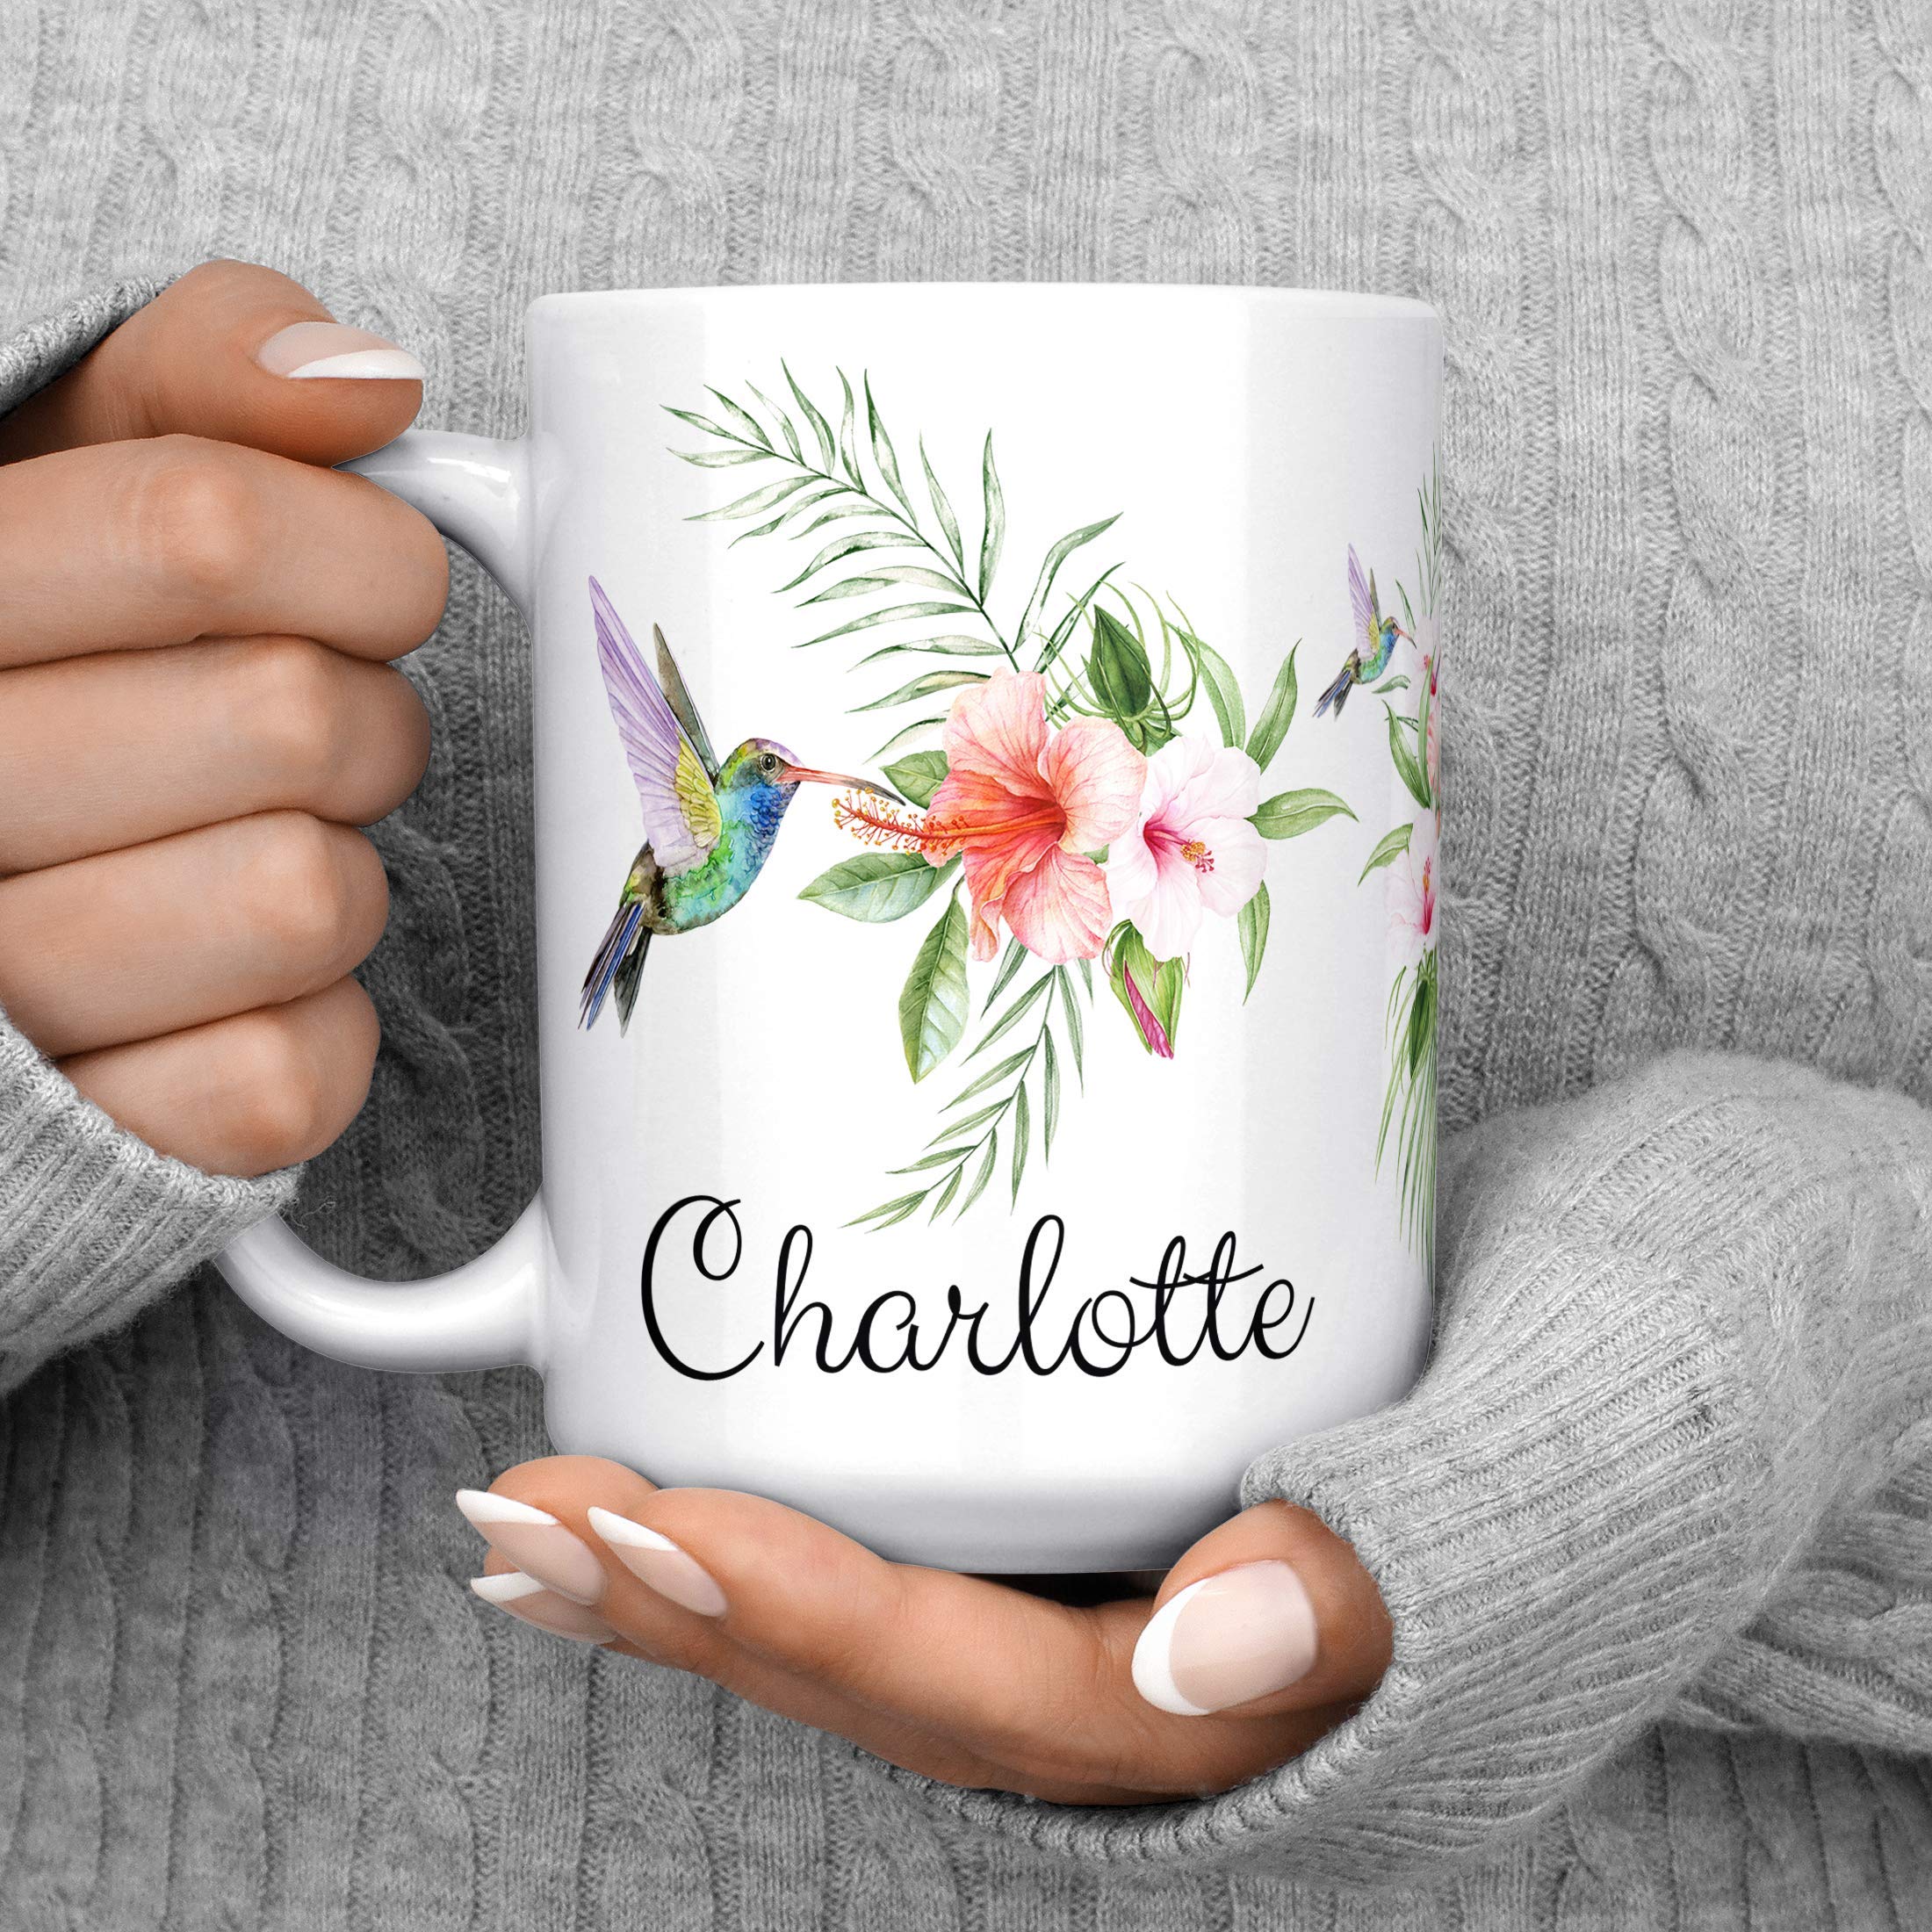 Hummingbird and Hibiscus Coffee Mug, Birds and Hibiscus Personalized with Name Microwave Dishwasher Safe Ceramic Cup